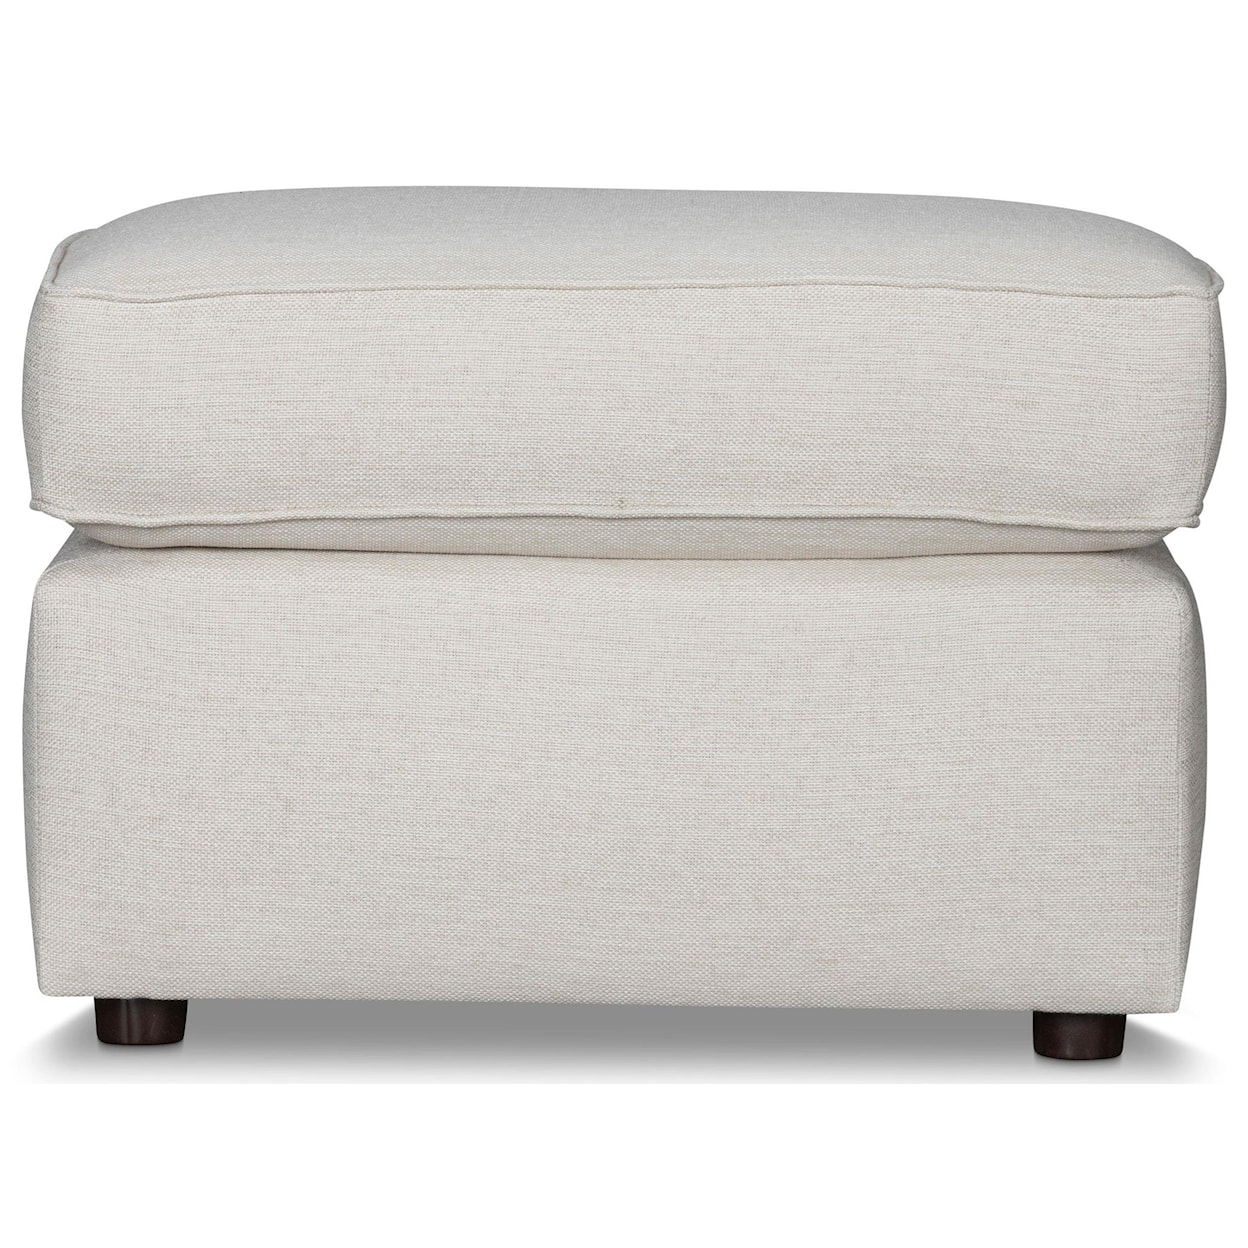 Stone & Leigh Furniture Leigh Upholstered Ottoman